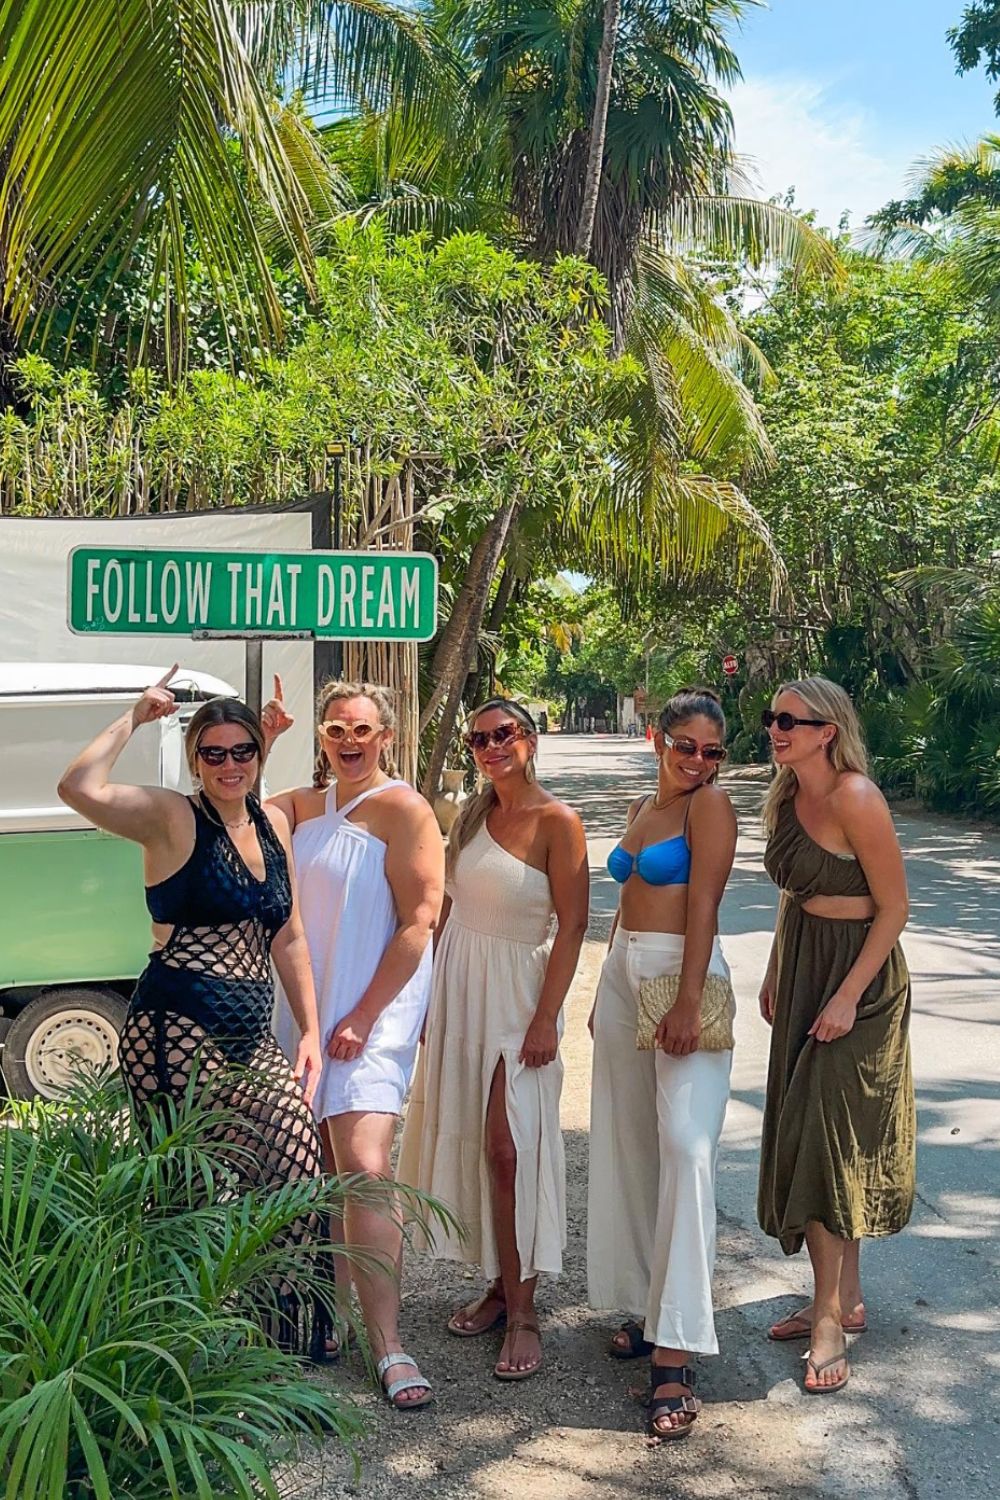 Discover the perfect blend of style and comfort with our Tulum outfit ideas and packing tips. From breezy beachside ensembles to chic evening wear, we've curated fashion guide for your tropical getaway. Explore Tulum's beauty in stunning outfits. #TulumStyle #TravelFashion | What To Wear In Tulum | What To Pack For Tulum | Tulum Outfit Ideas | Tulum Packing List | Tulum Packing Guide | Tulum Packing Checklist | Tulum Outfits Ideas Black Women | Tulum Outfits Ideas Plus Size | Night Party Outfit